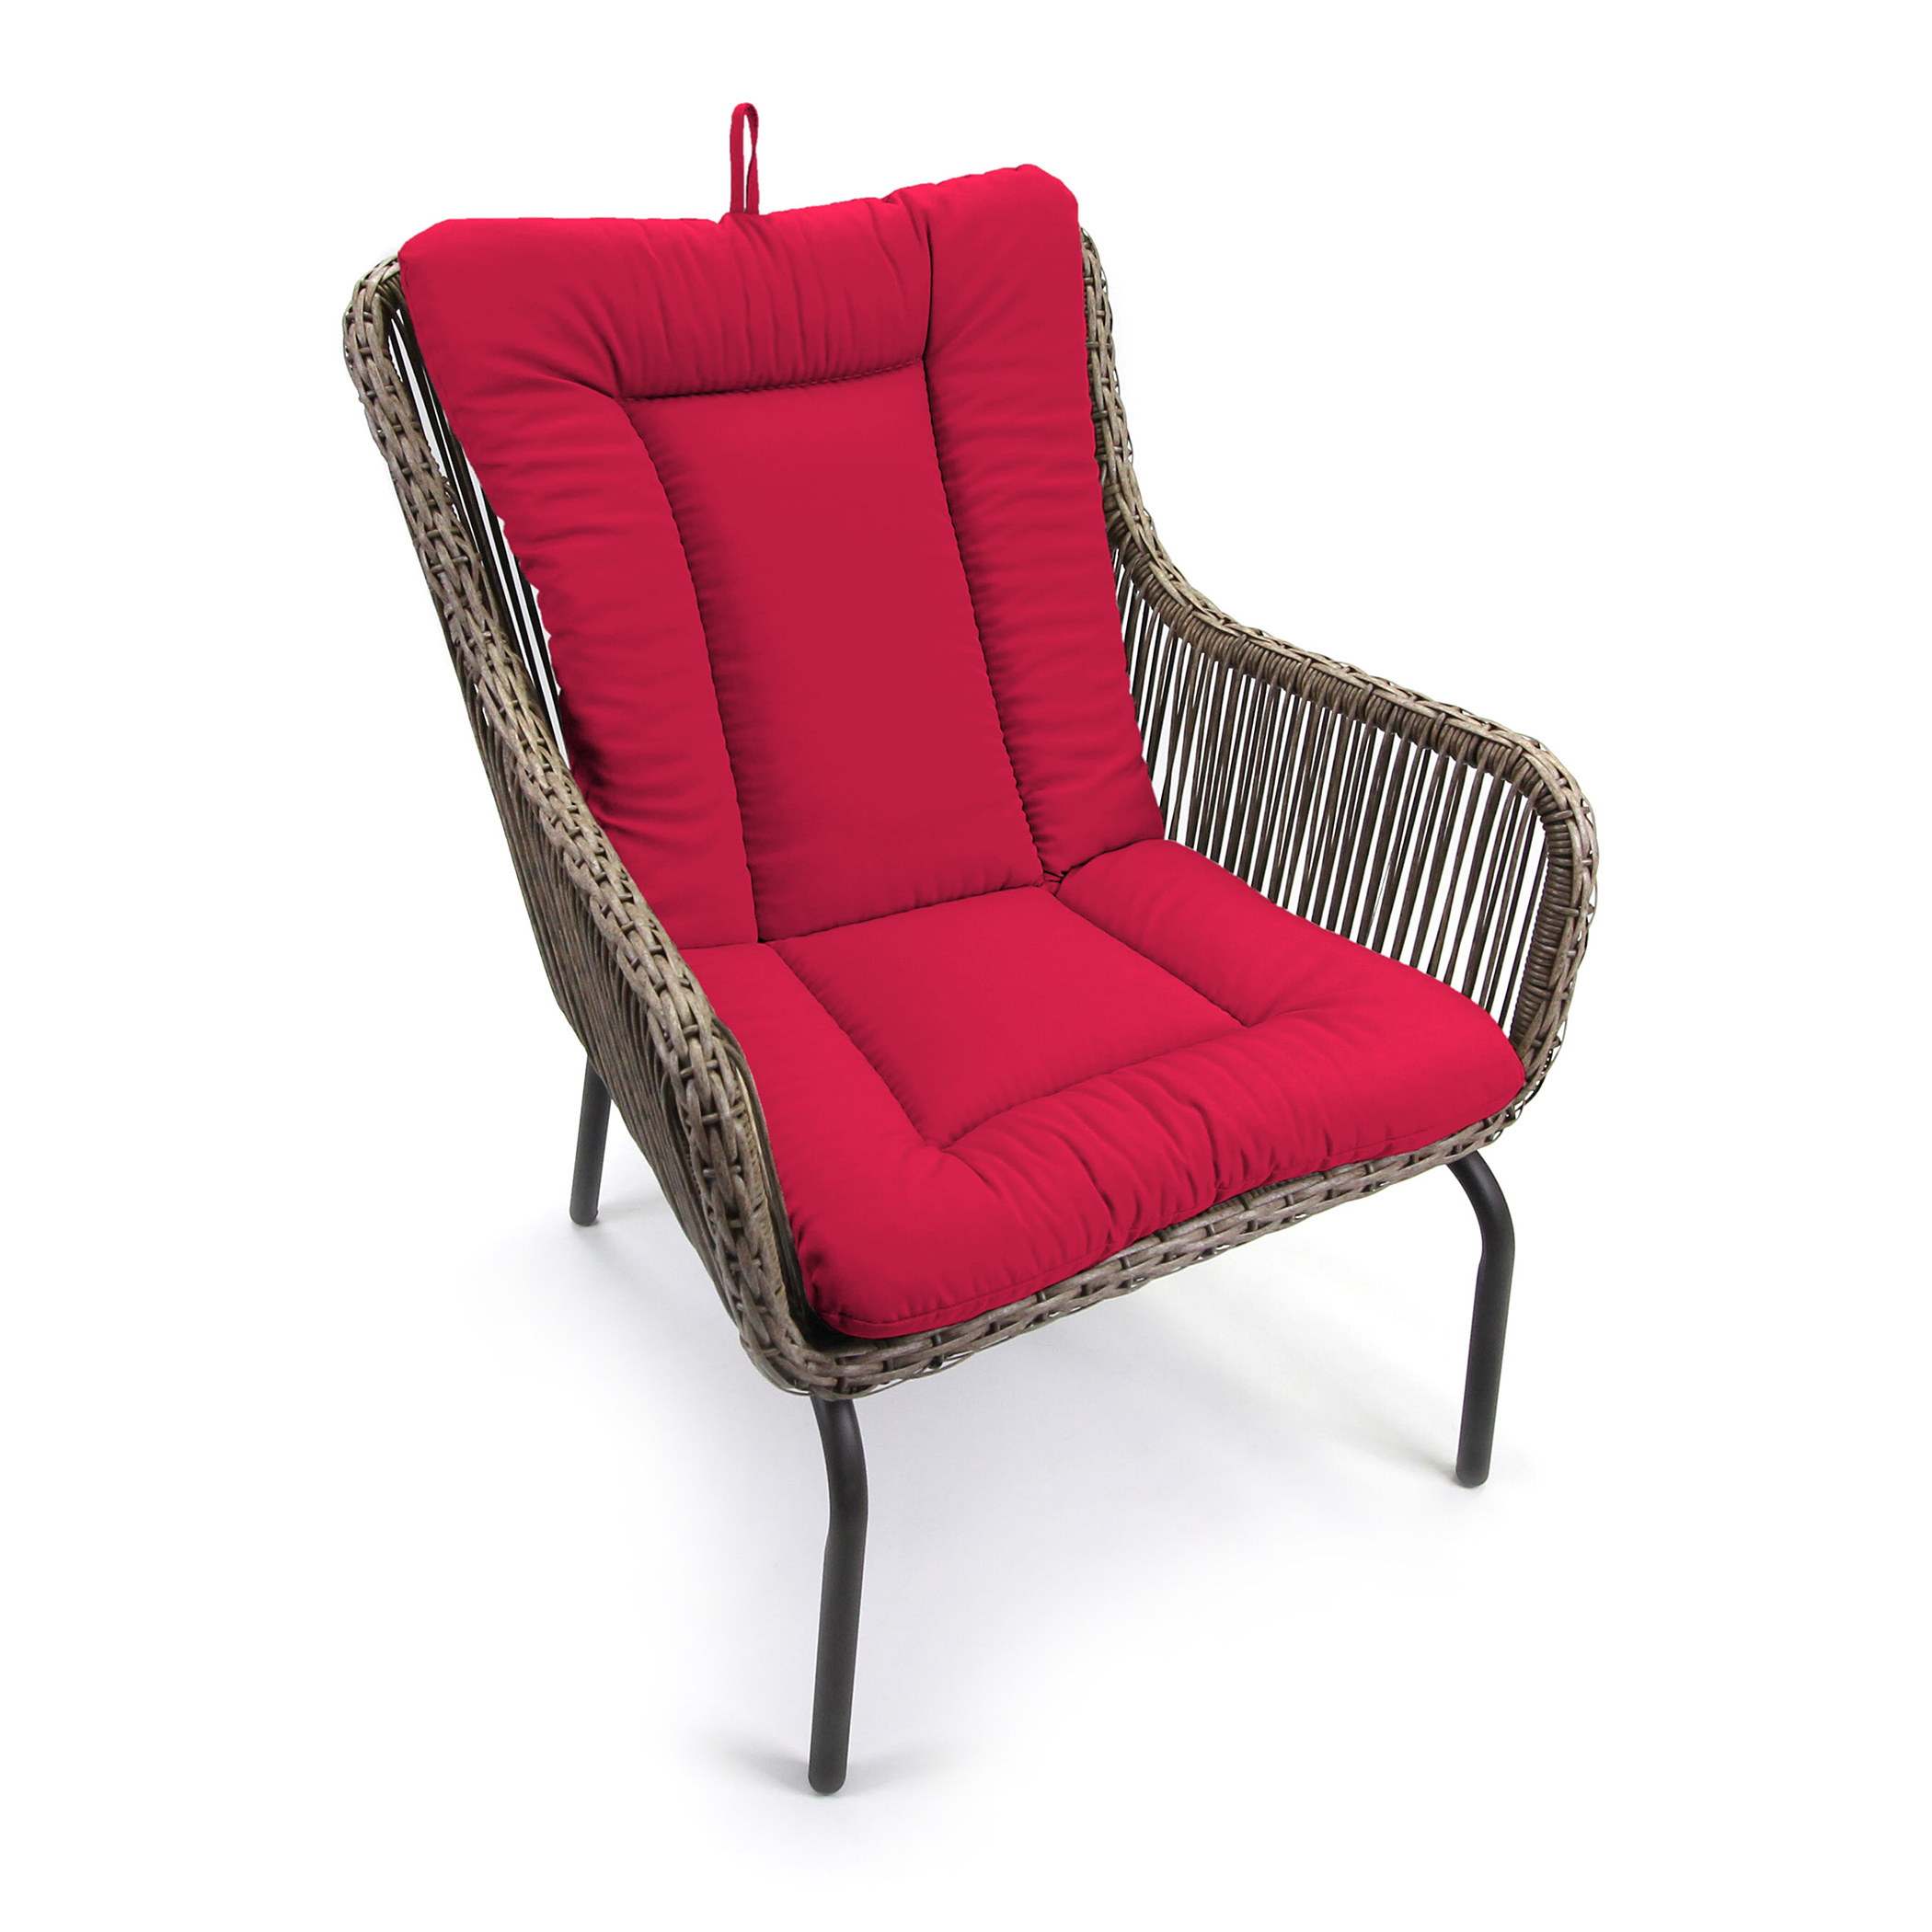 Jordan Manufacturing 38" x 21" Solid Pompei Red Euro Style Outdoor Chair Cushion - image 2 of 11